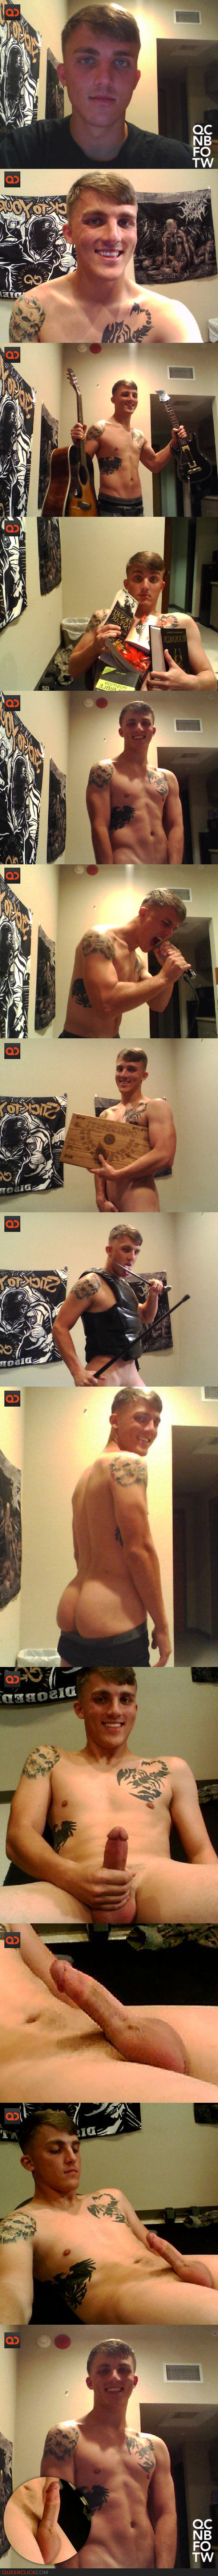 nude_bf_of_the_week-hobbies_fan-collage